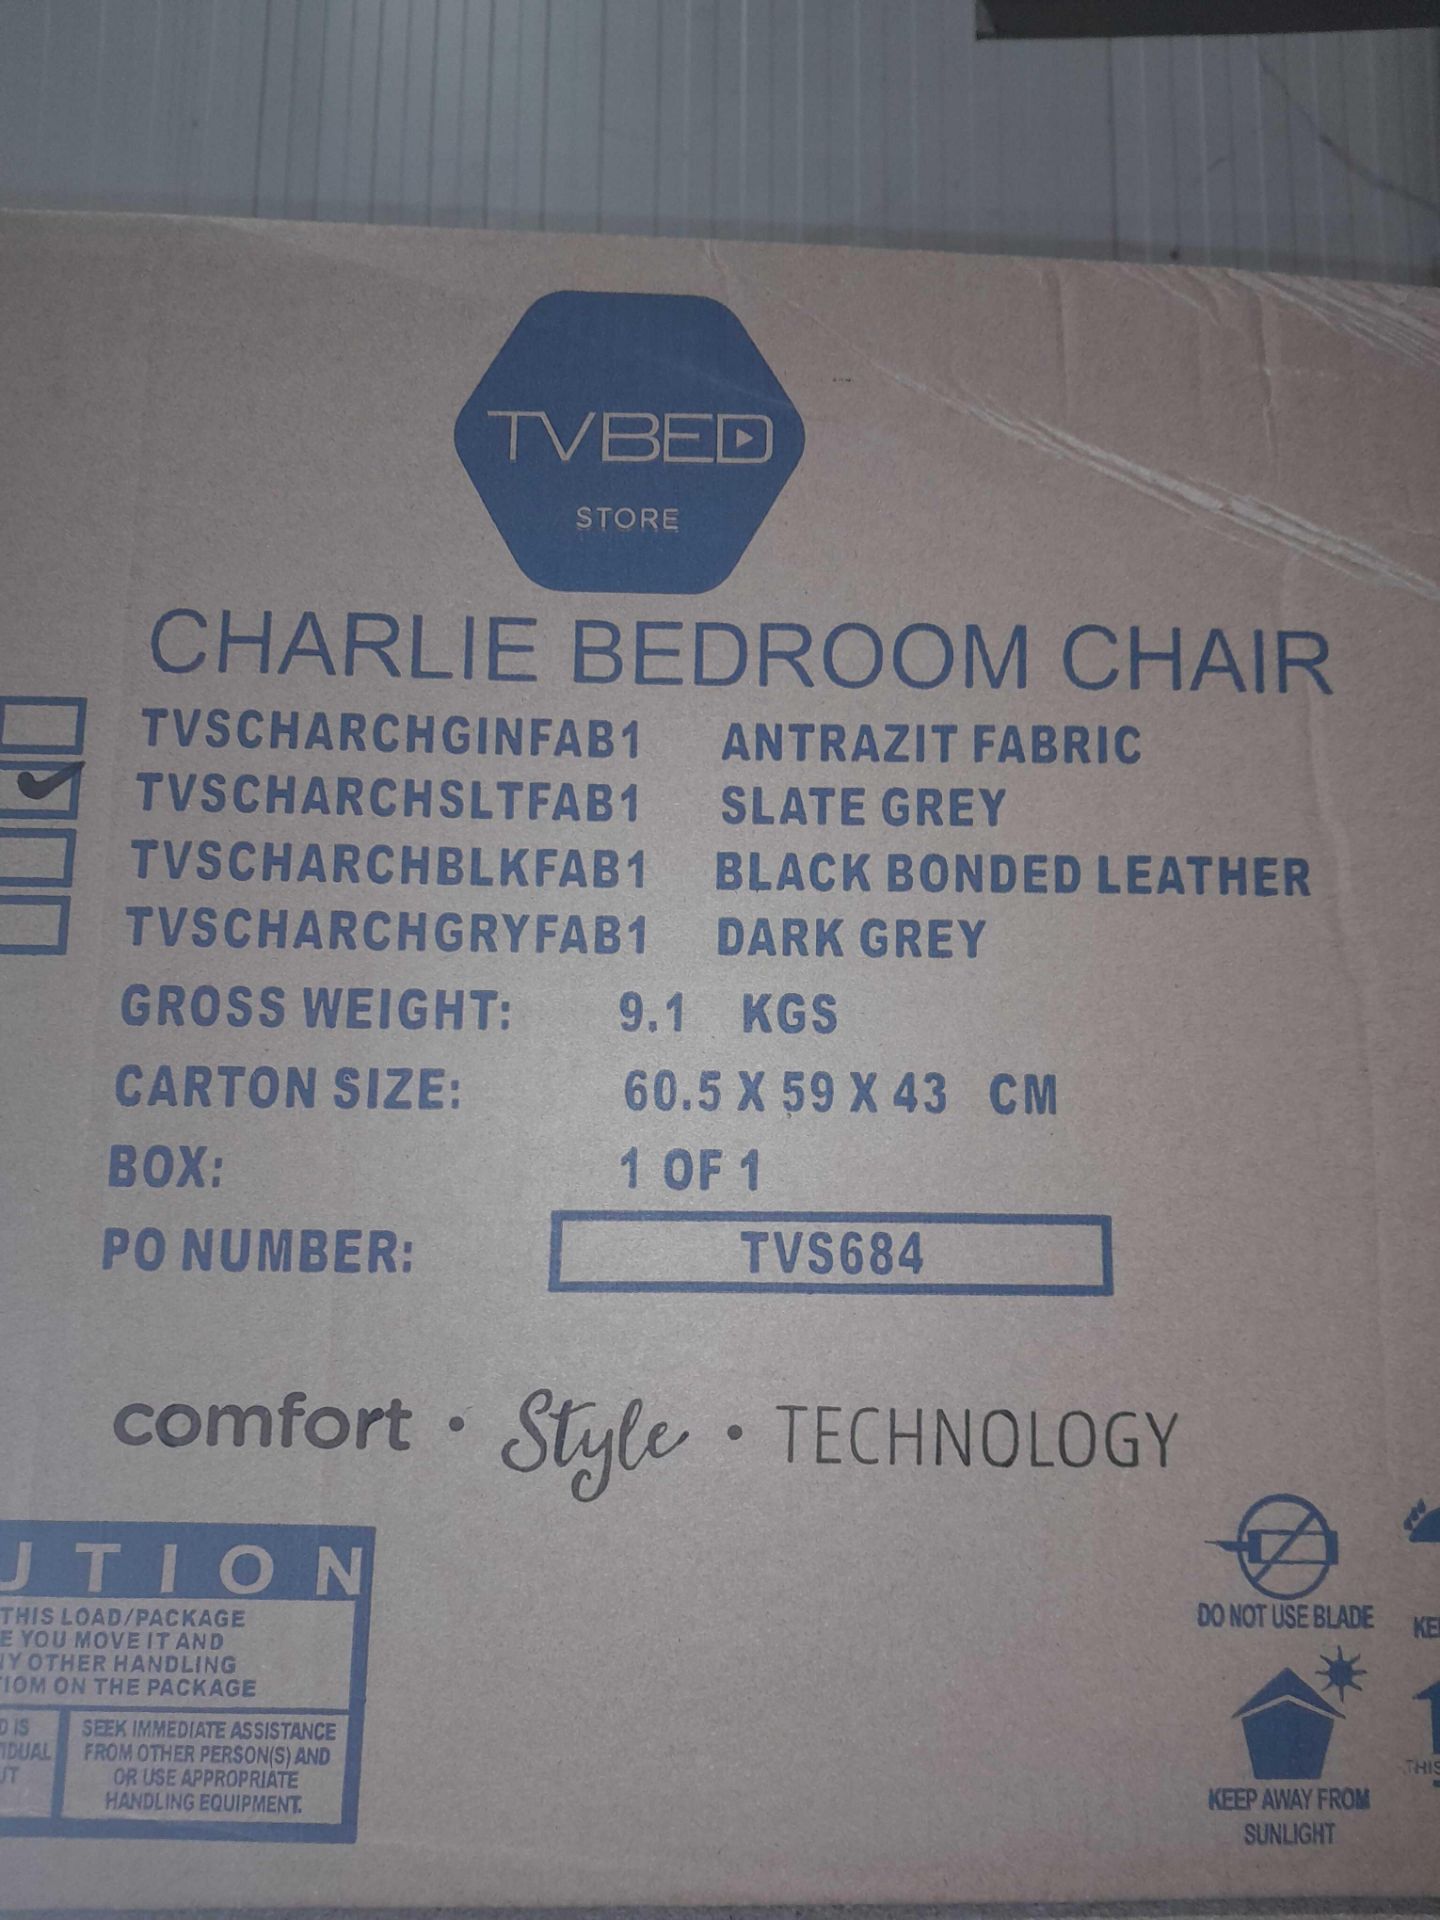 RRP £165 Brand New Tv Bed Store Charlie Bedroom Chair - Image 2 of 2